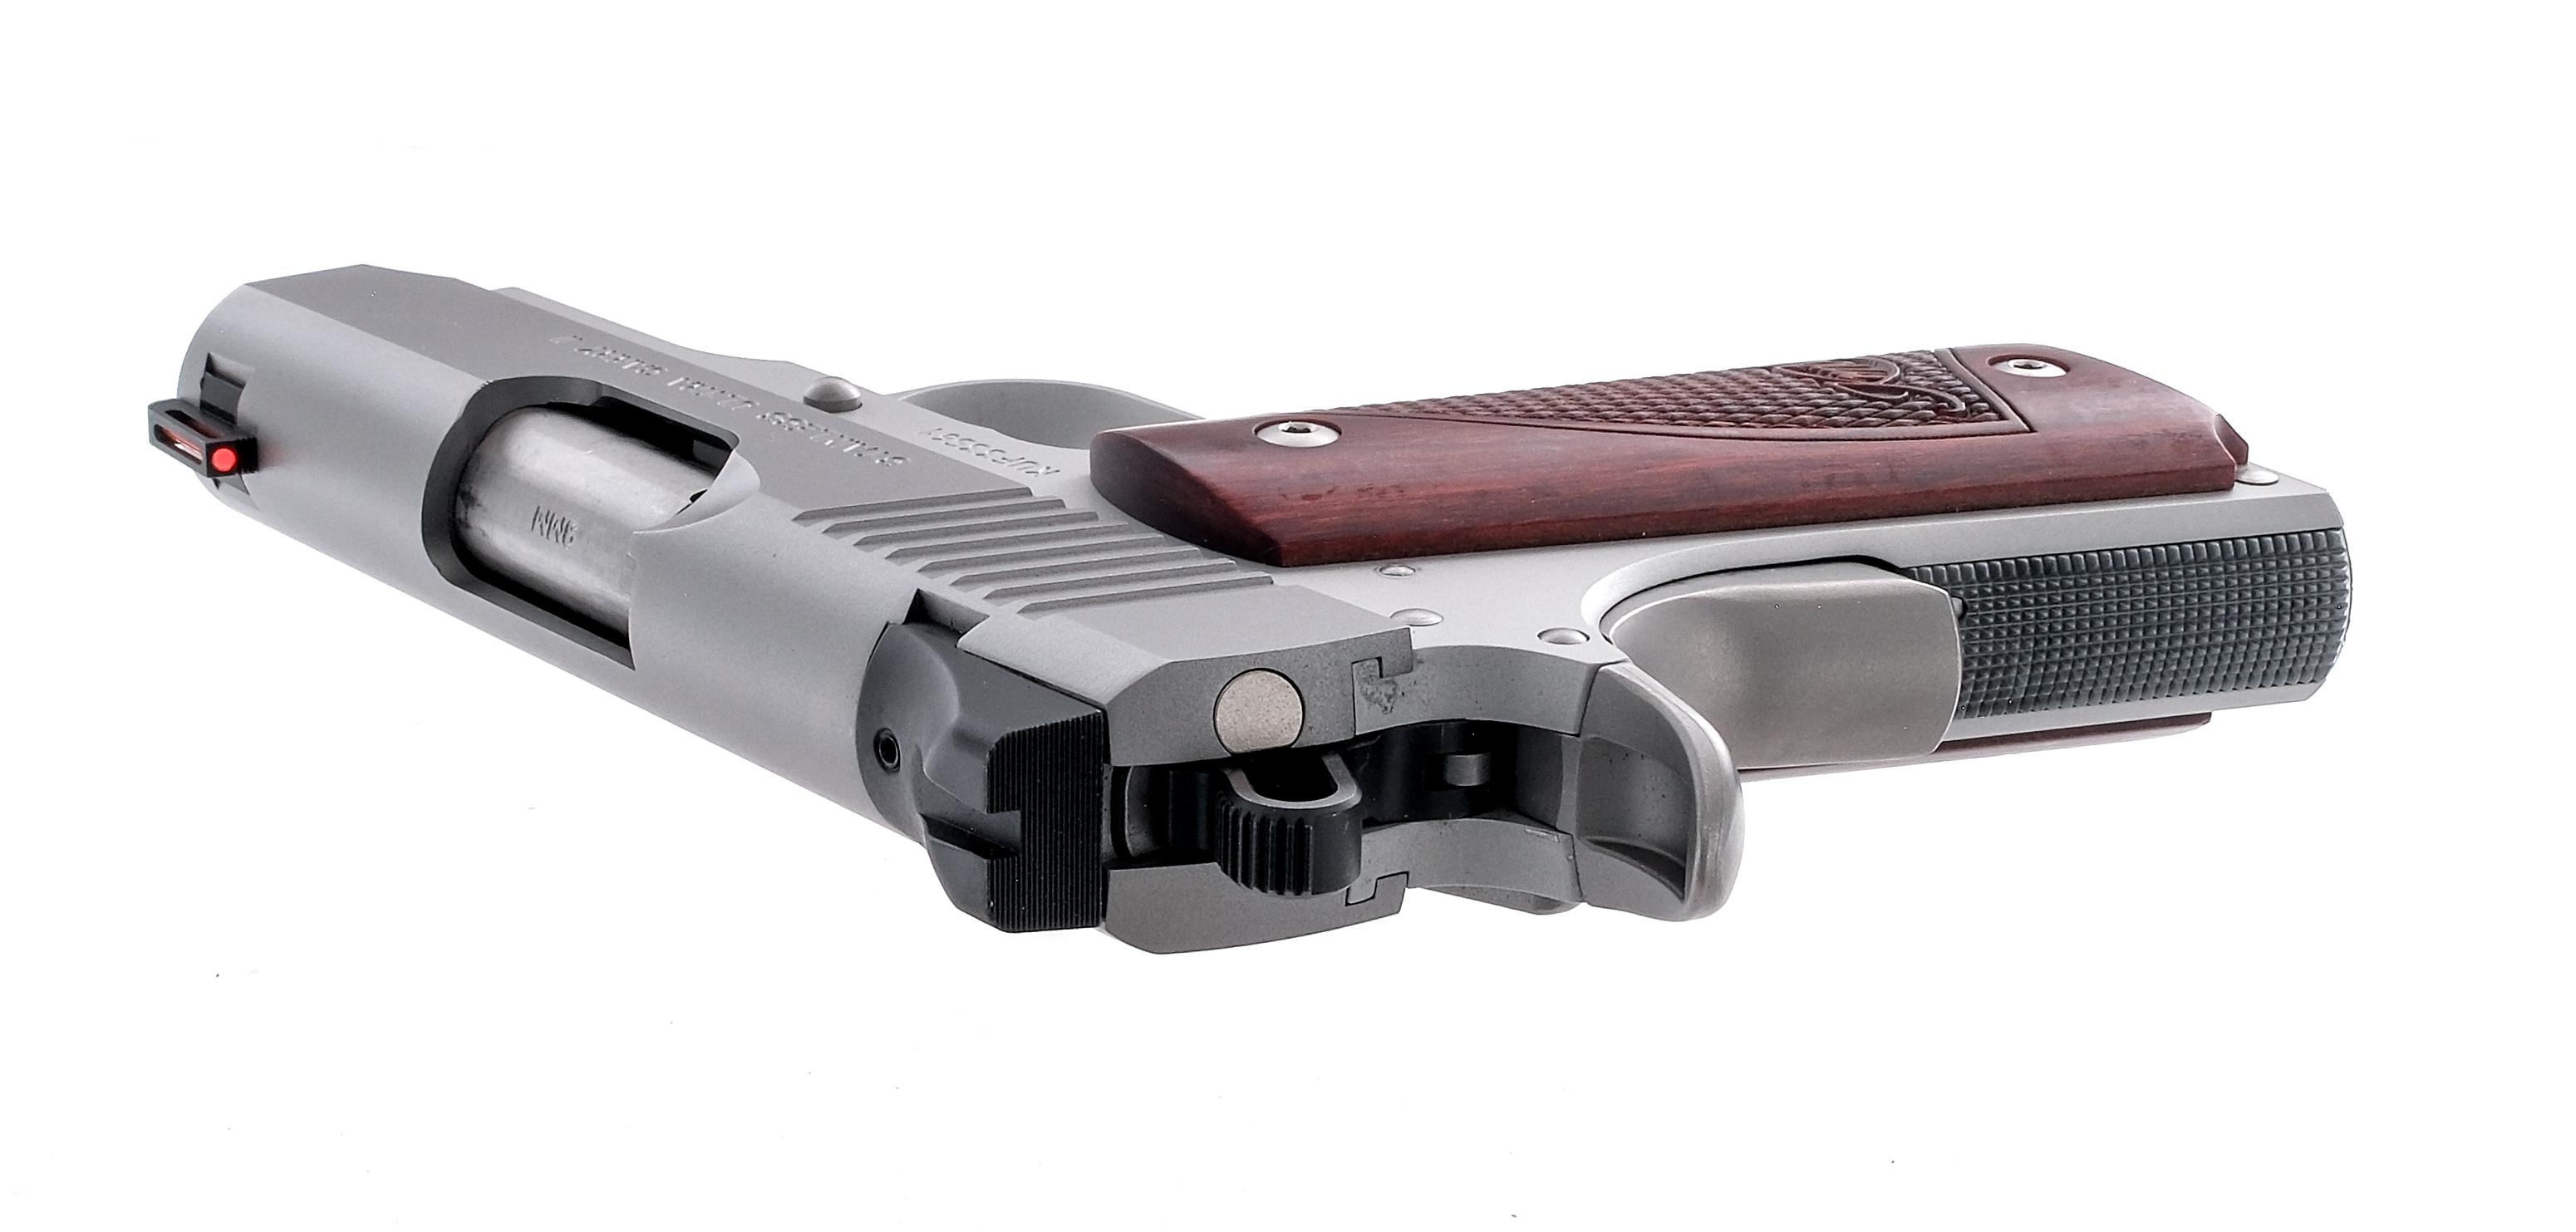 Kimber Stainless Ultra Carry II 9mm 1911